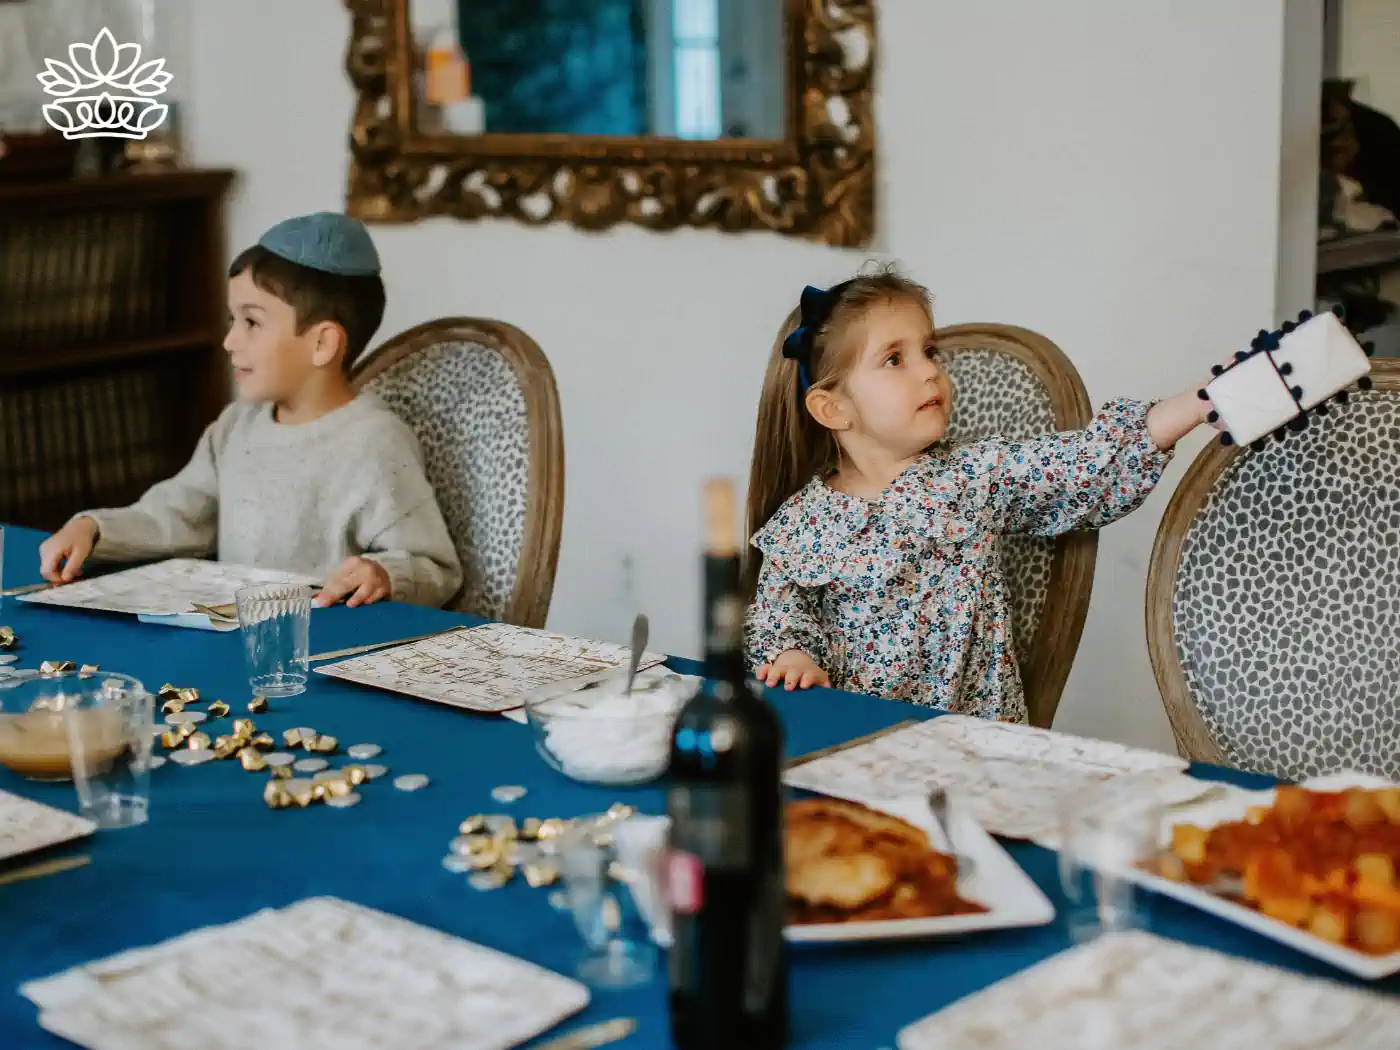 Two children sitting at a table, one passing a gift to the other, surrounded by Hanukkah decorations. Fabulous Flowers and Gifts - Hanukkah Collection.